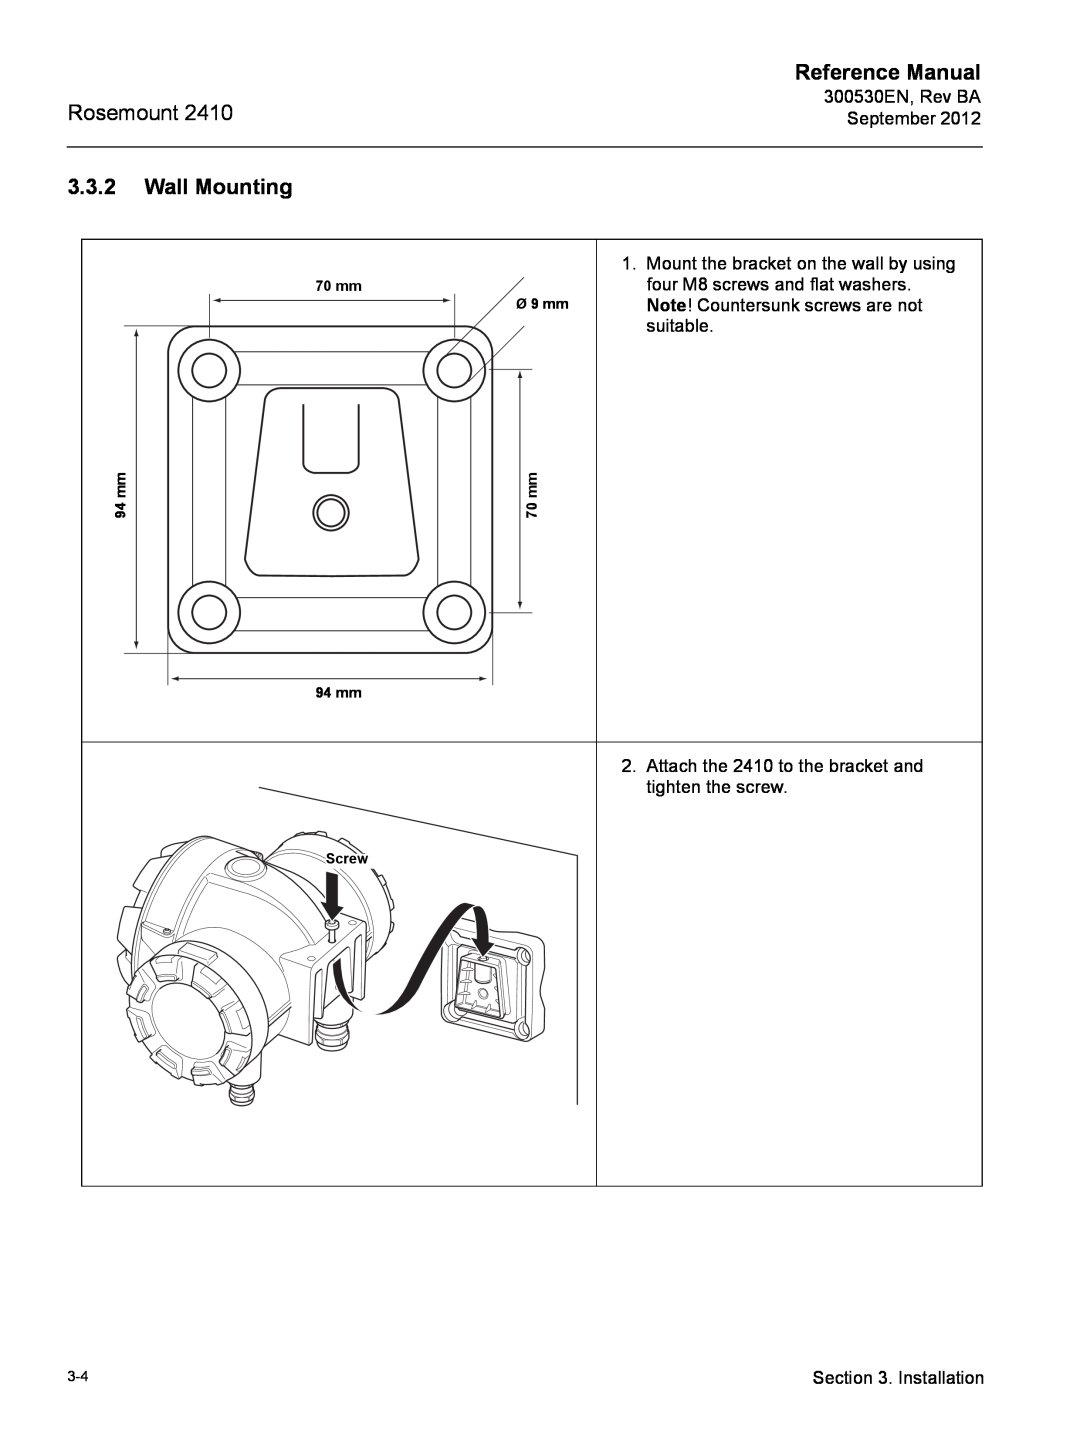 Emerson Process Management Rosemount 2410 manual Wall Mounting, Reference Manual, Ø 9 mm, 70 mm 94 mm, Screw 